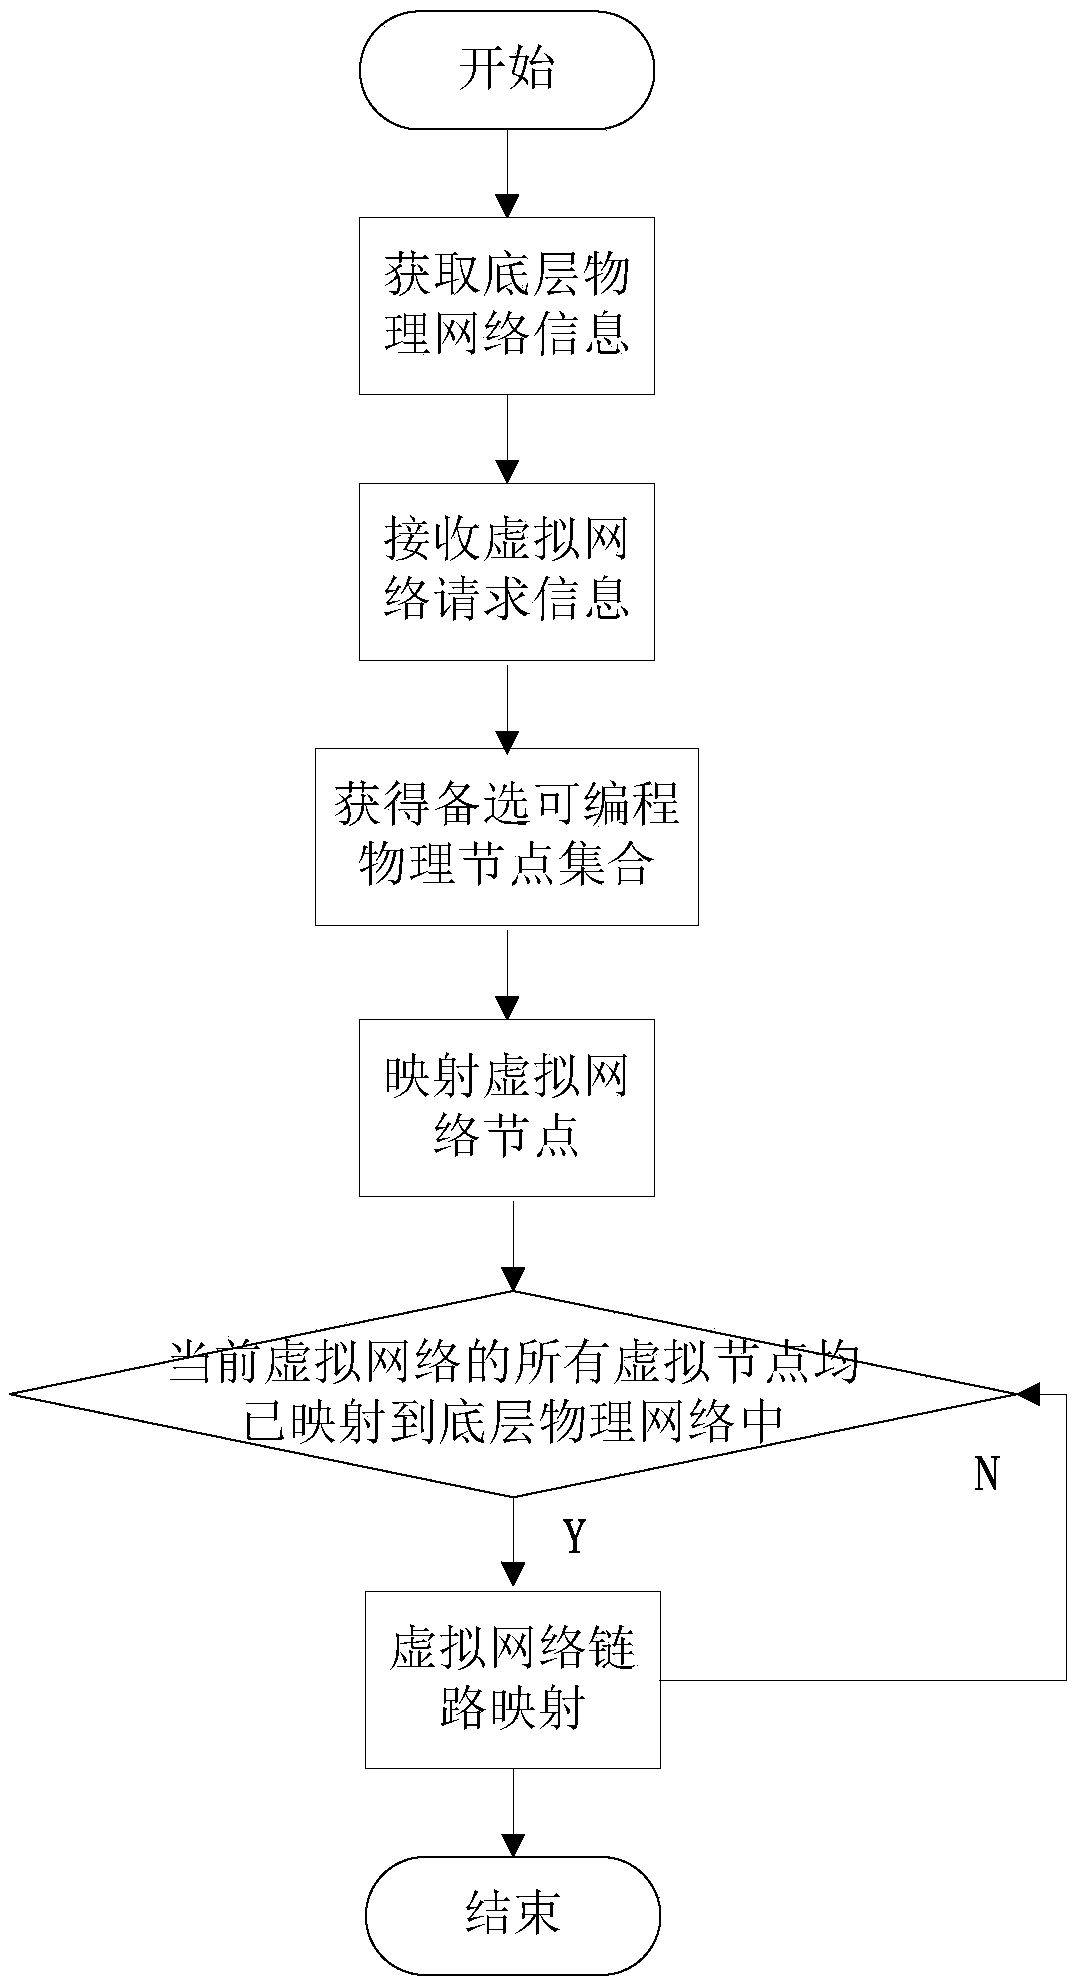 Virtual network mapping method under SDN-oriented elastic optical network